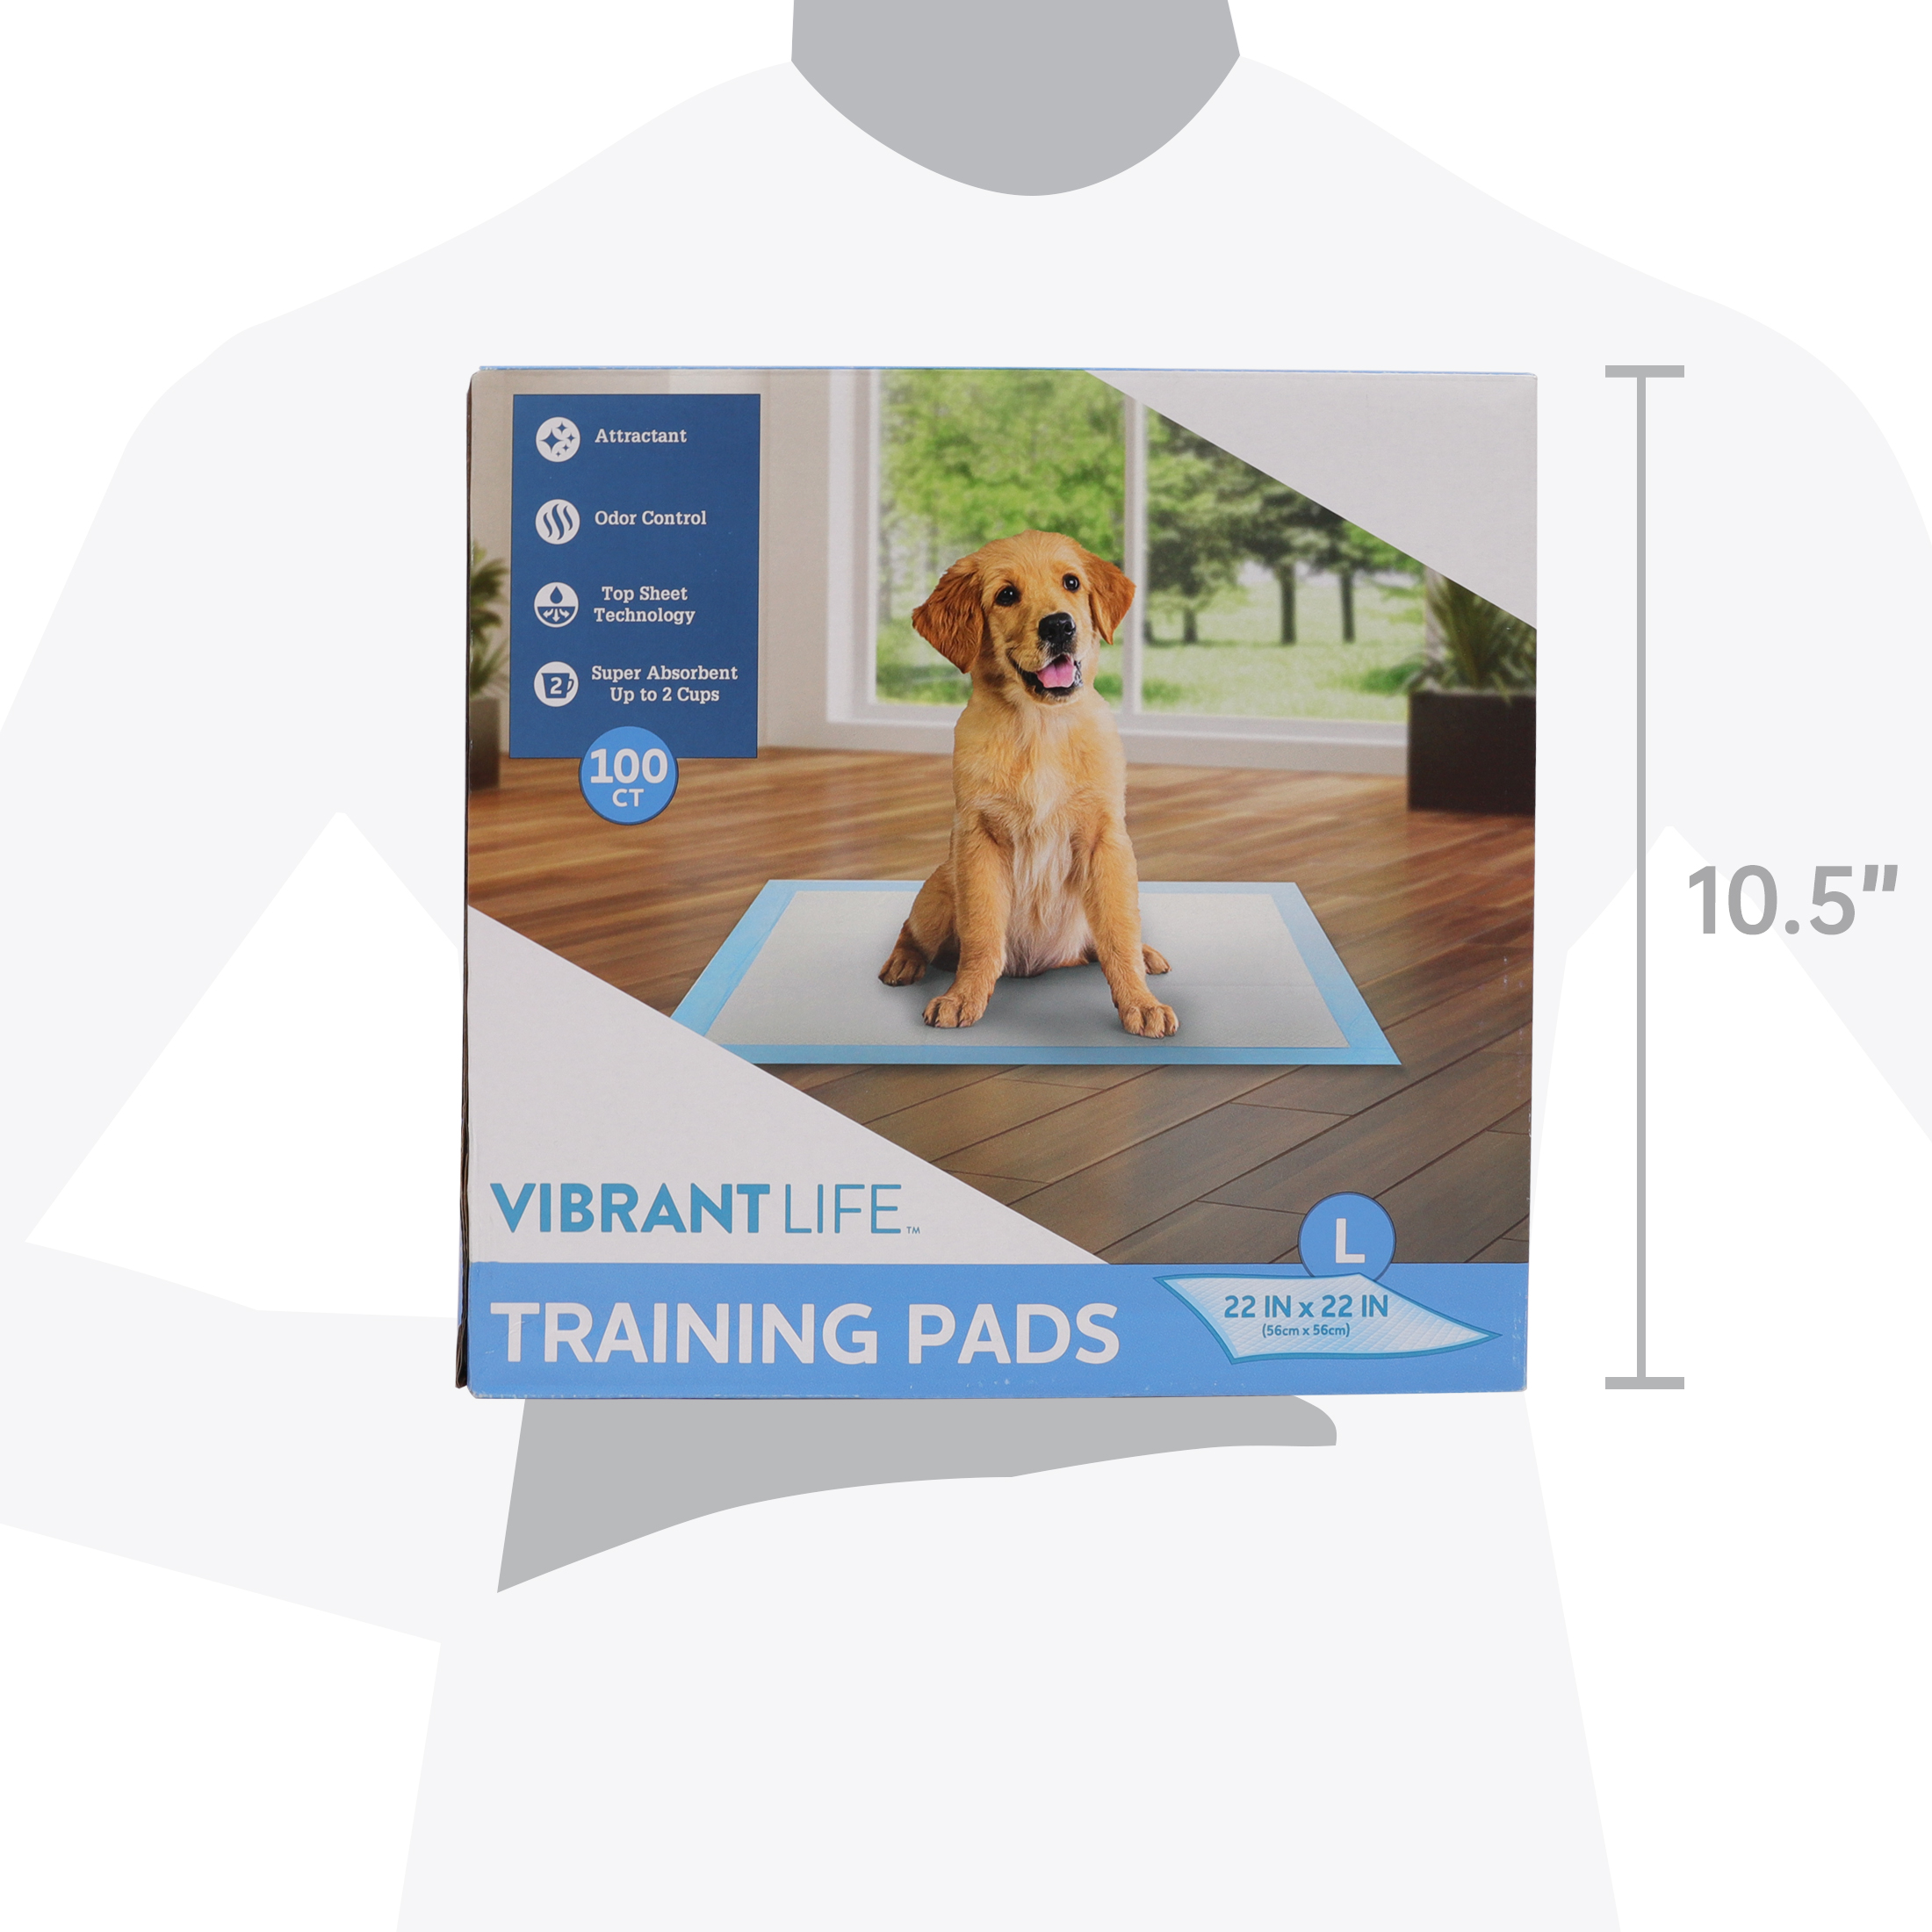 Vibrant Life Training Pads, Dog & Puppy Pads, L, 22 in x 22 in,100 Count - image 2 of 7